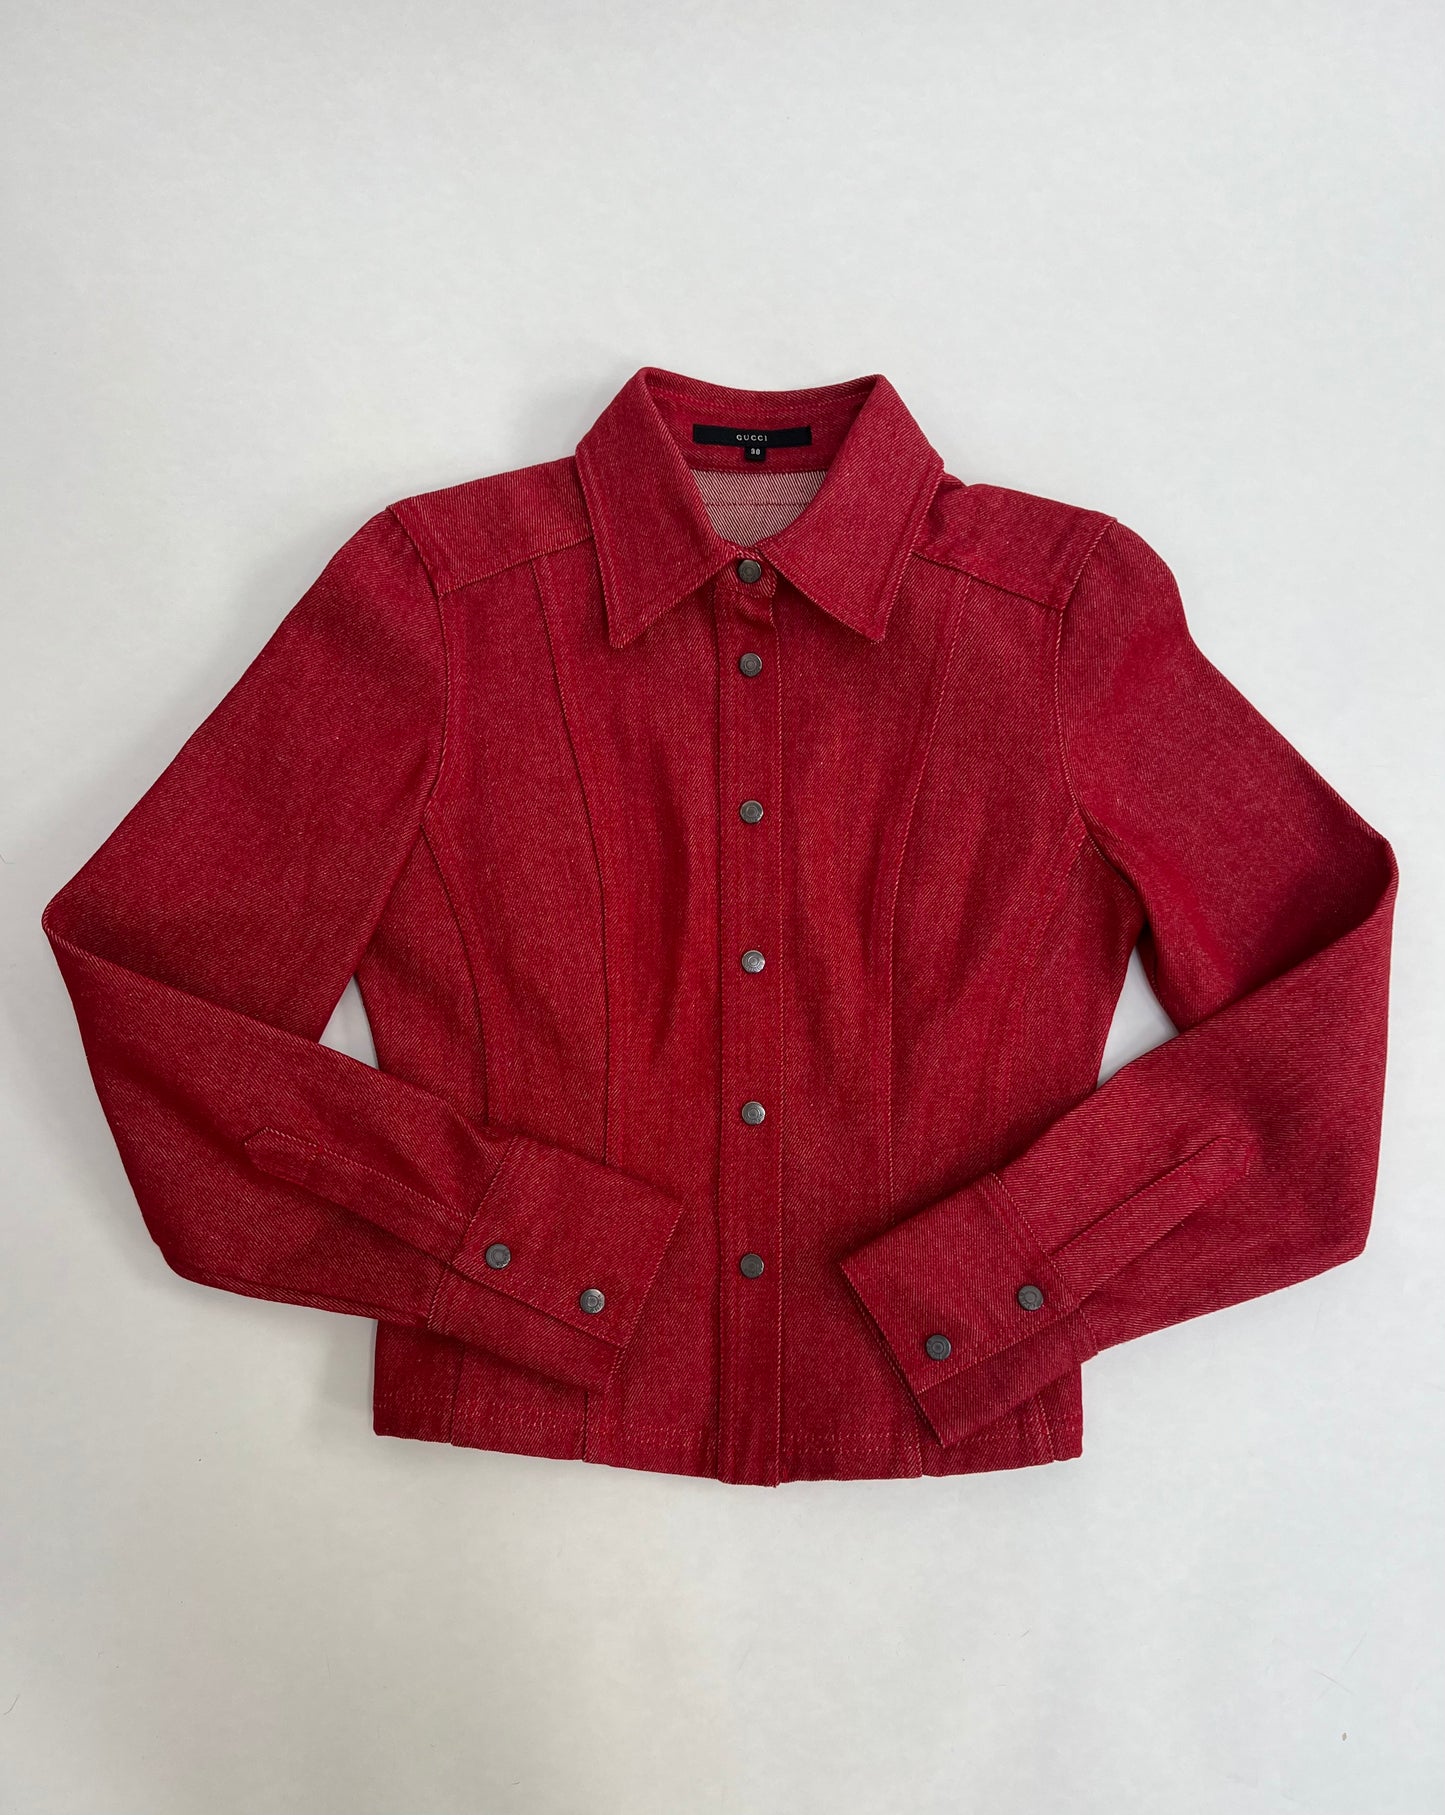 Gucci by Tom Ford 1999 red denim jacket